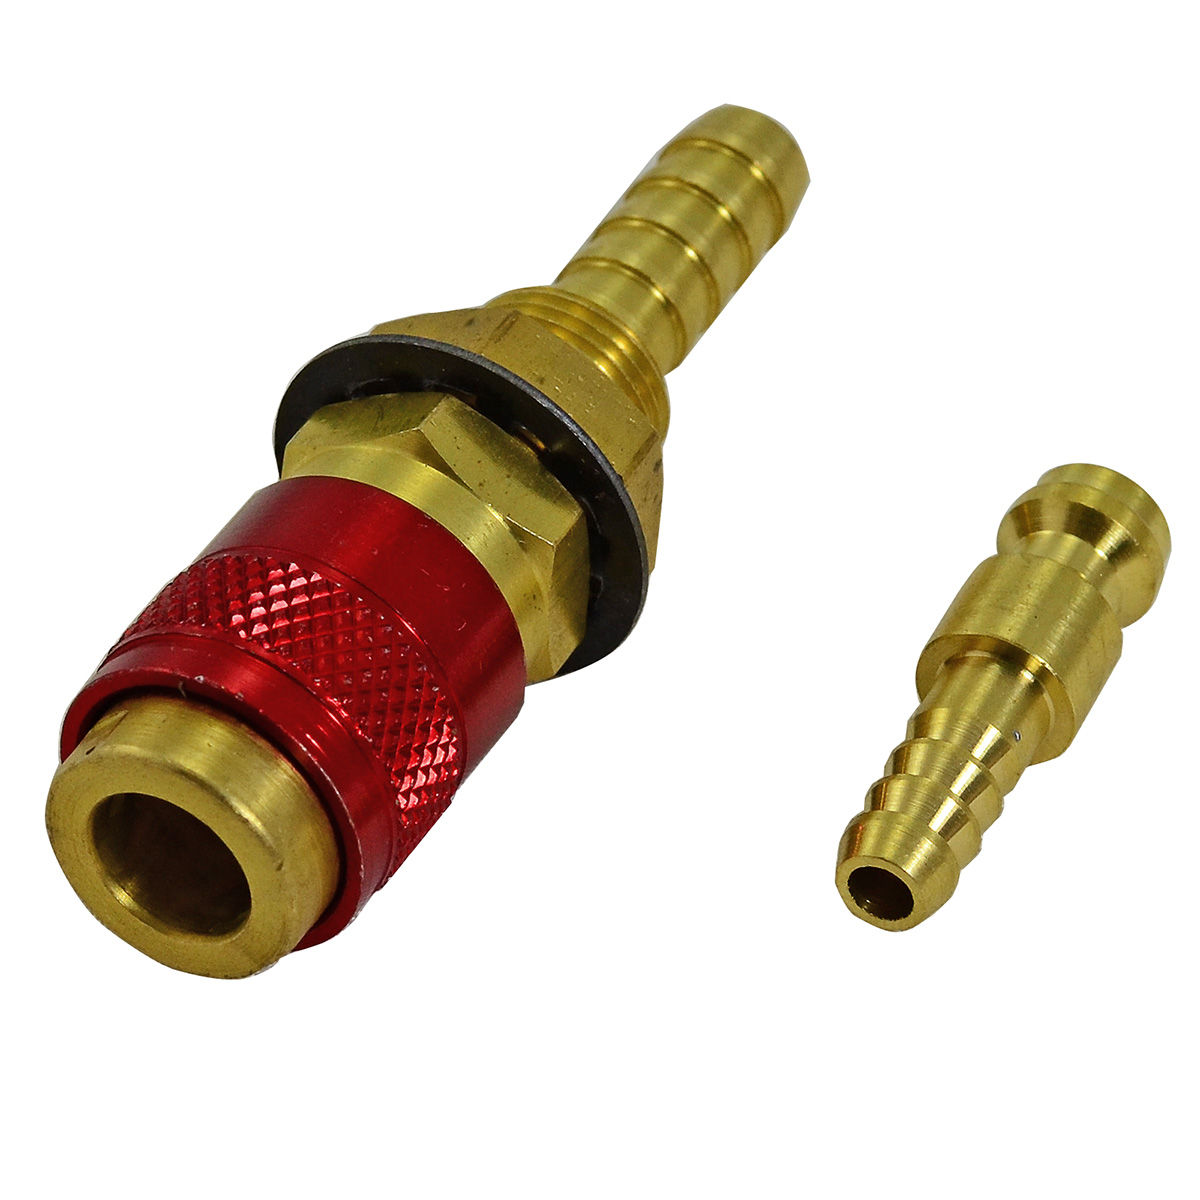 TIG Welding Torch Fitting Connector Adapter (Miller Gas Quick Hose Connector)